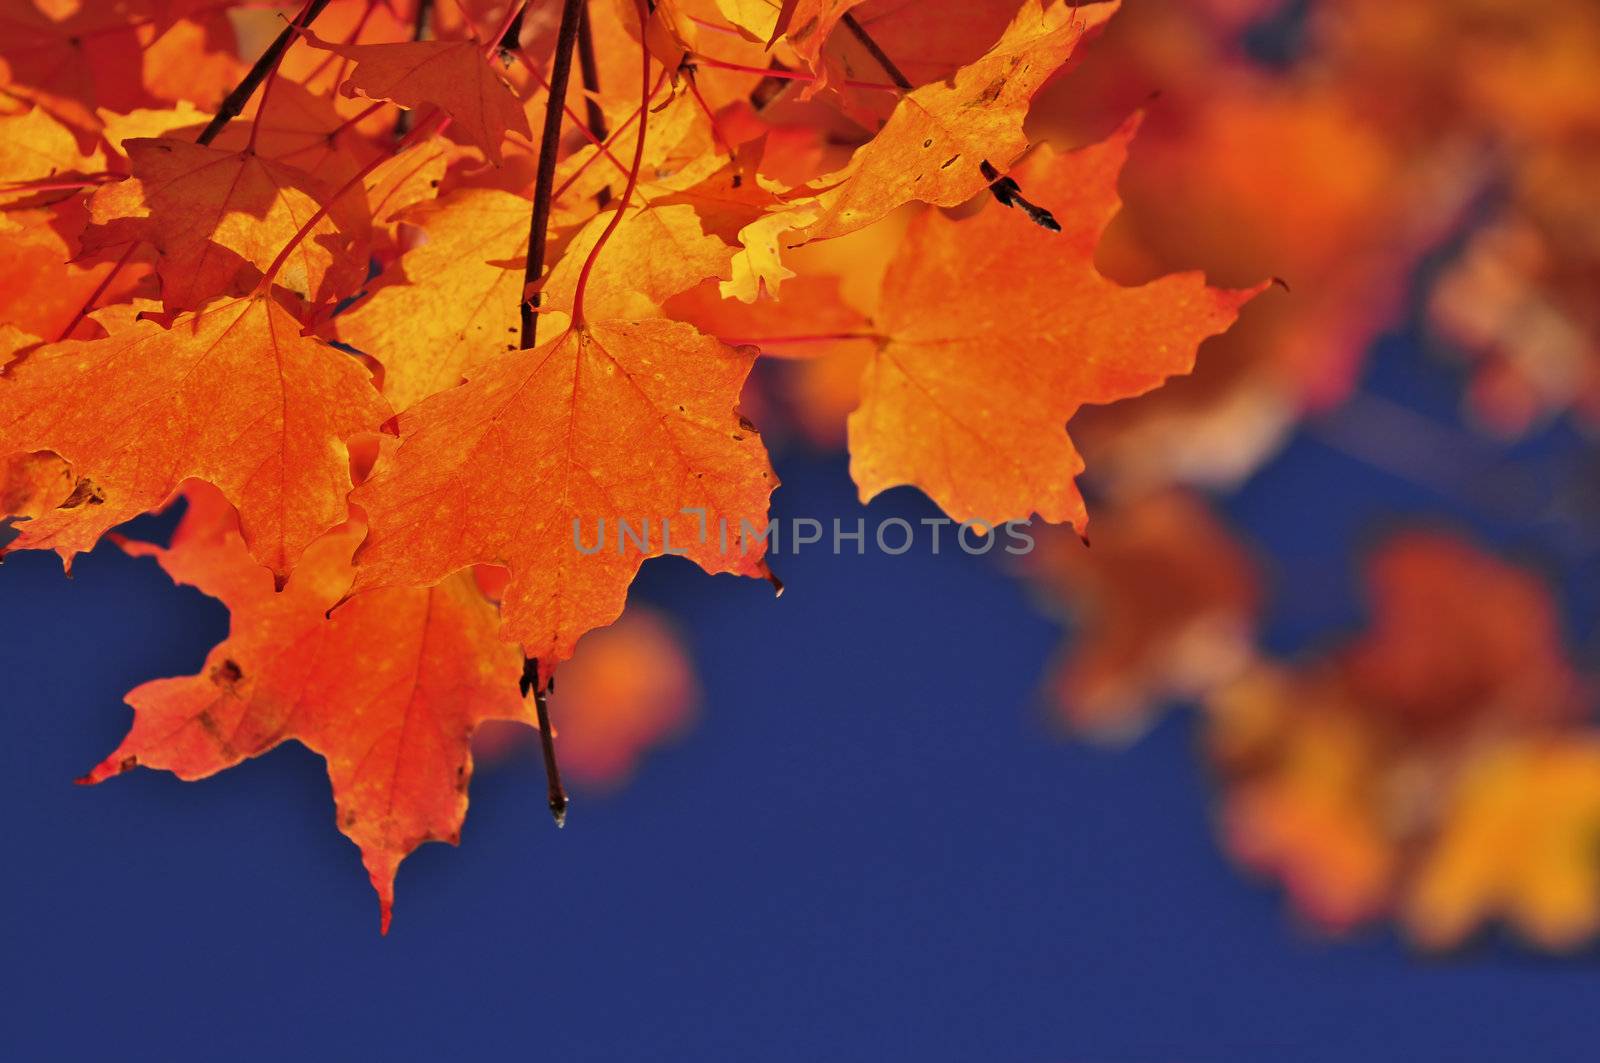 Fall maple leaves by elenathewise